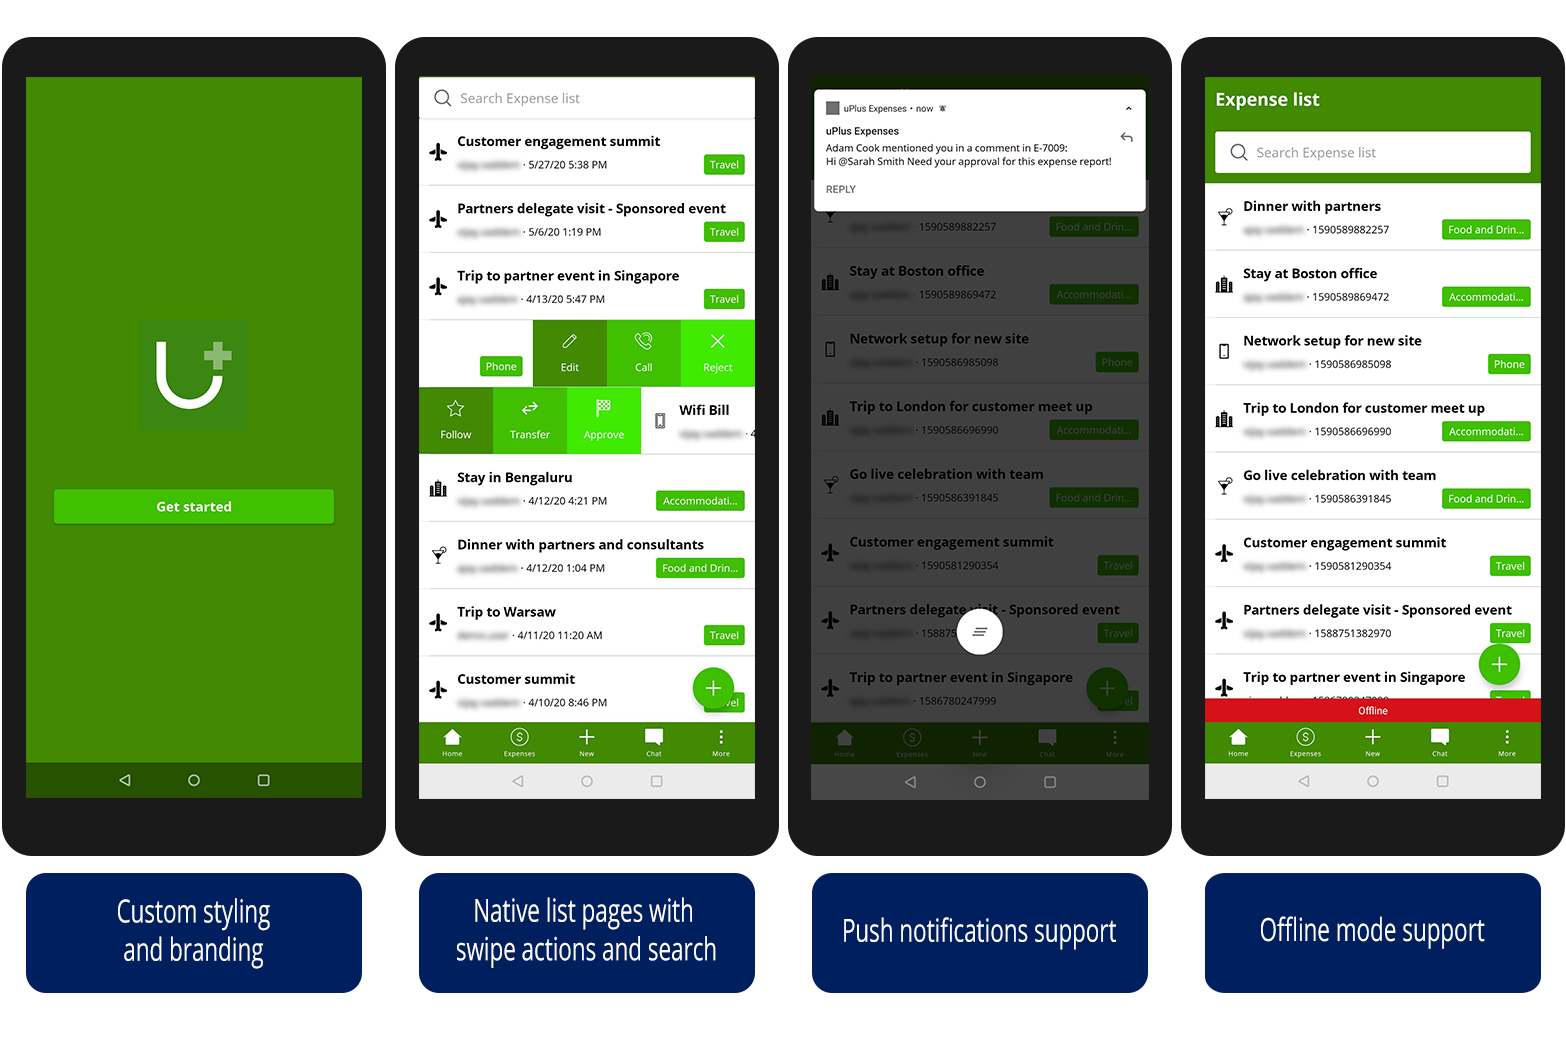 The image shows an Expenses reporting app on four mobile devices, each representing a different mobile feature: custom styling, native list pages, push notifications, and offline support.